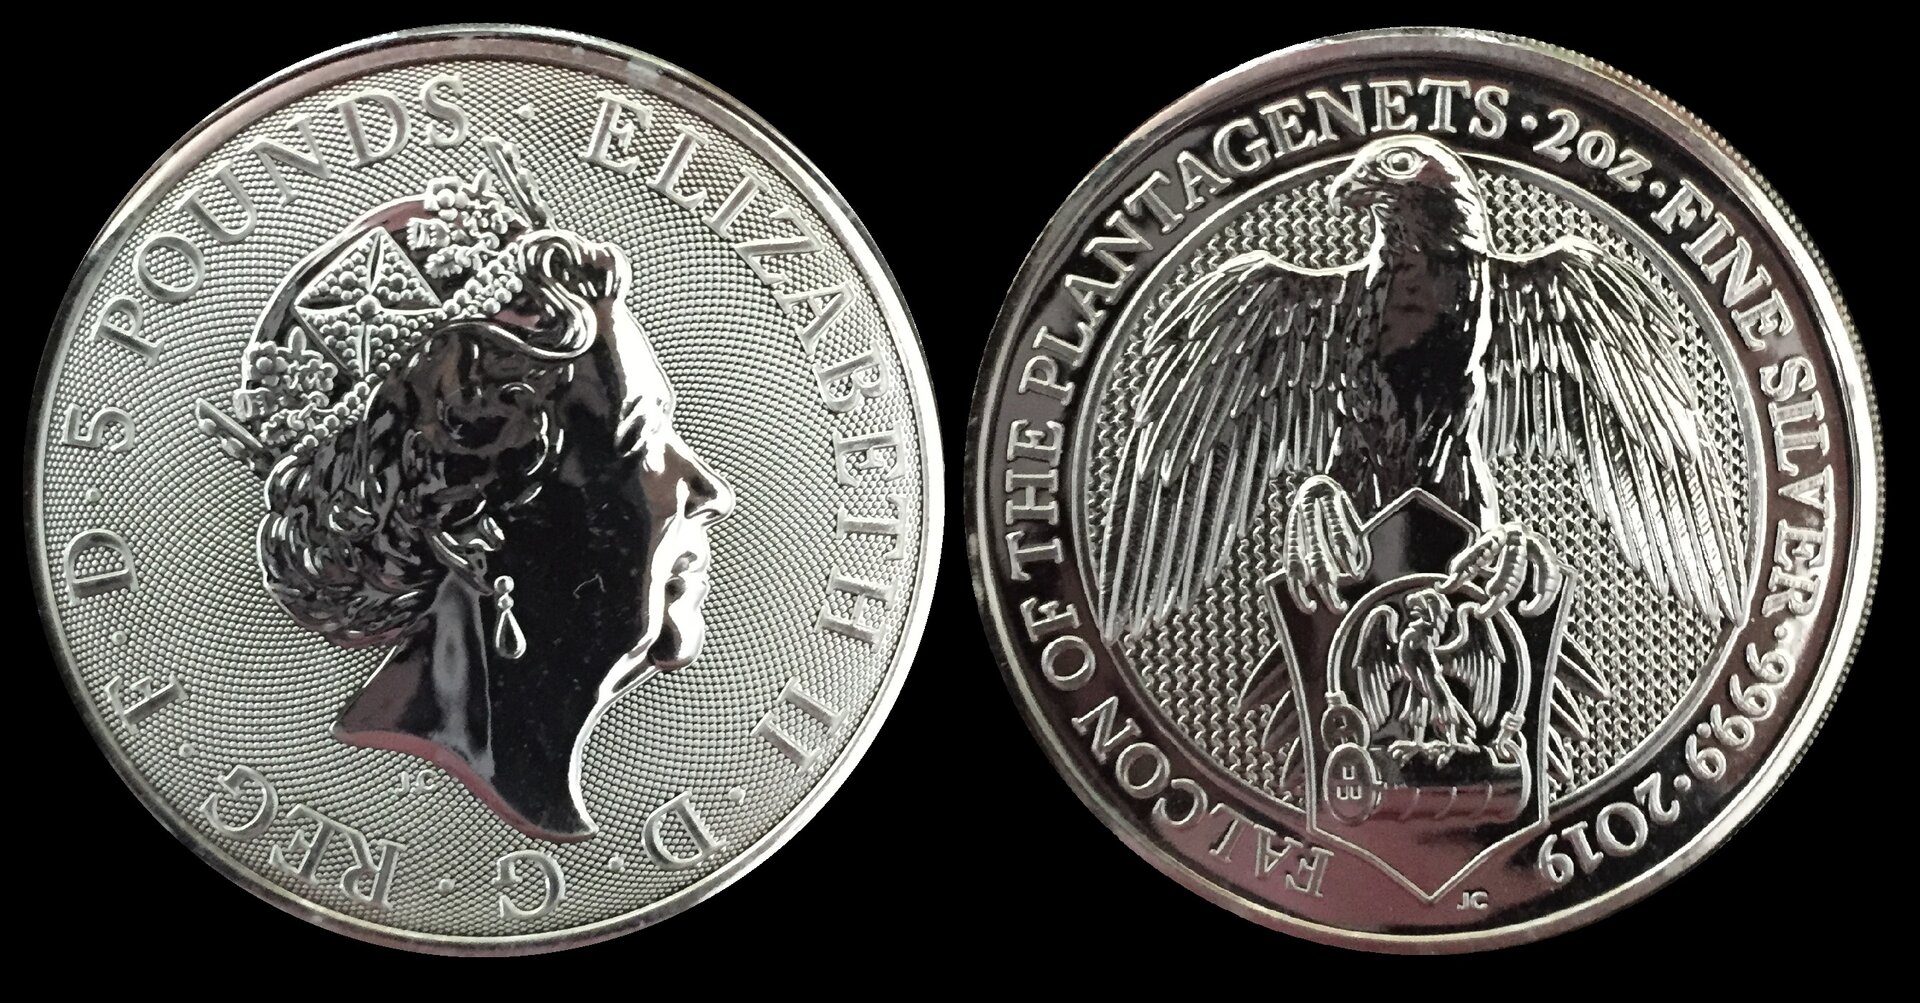 2019 Queen's Beasts Falcon of the Plantagenets 2oz Ag.jpg